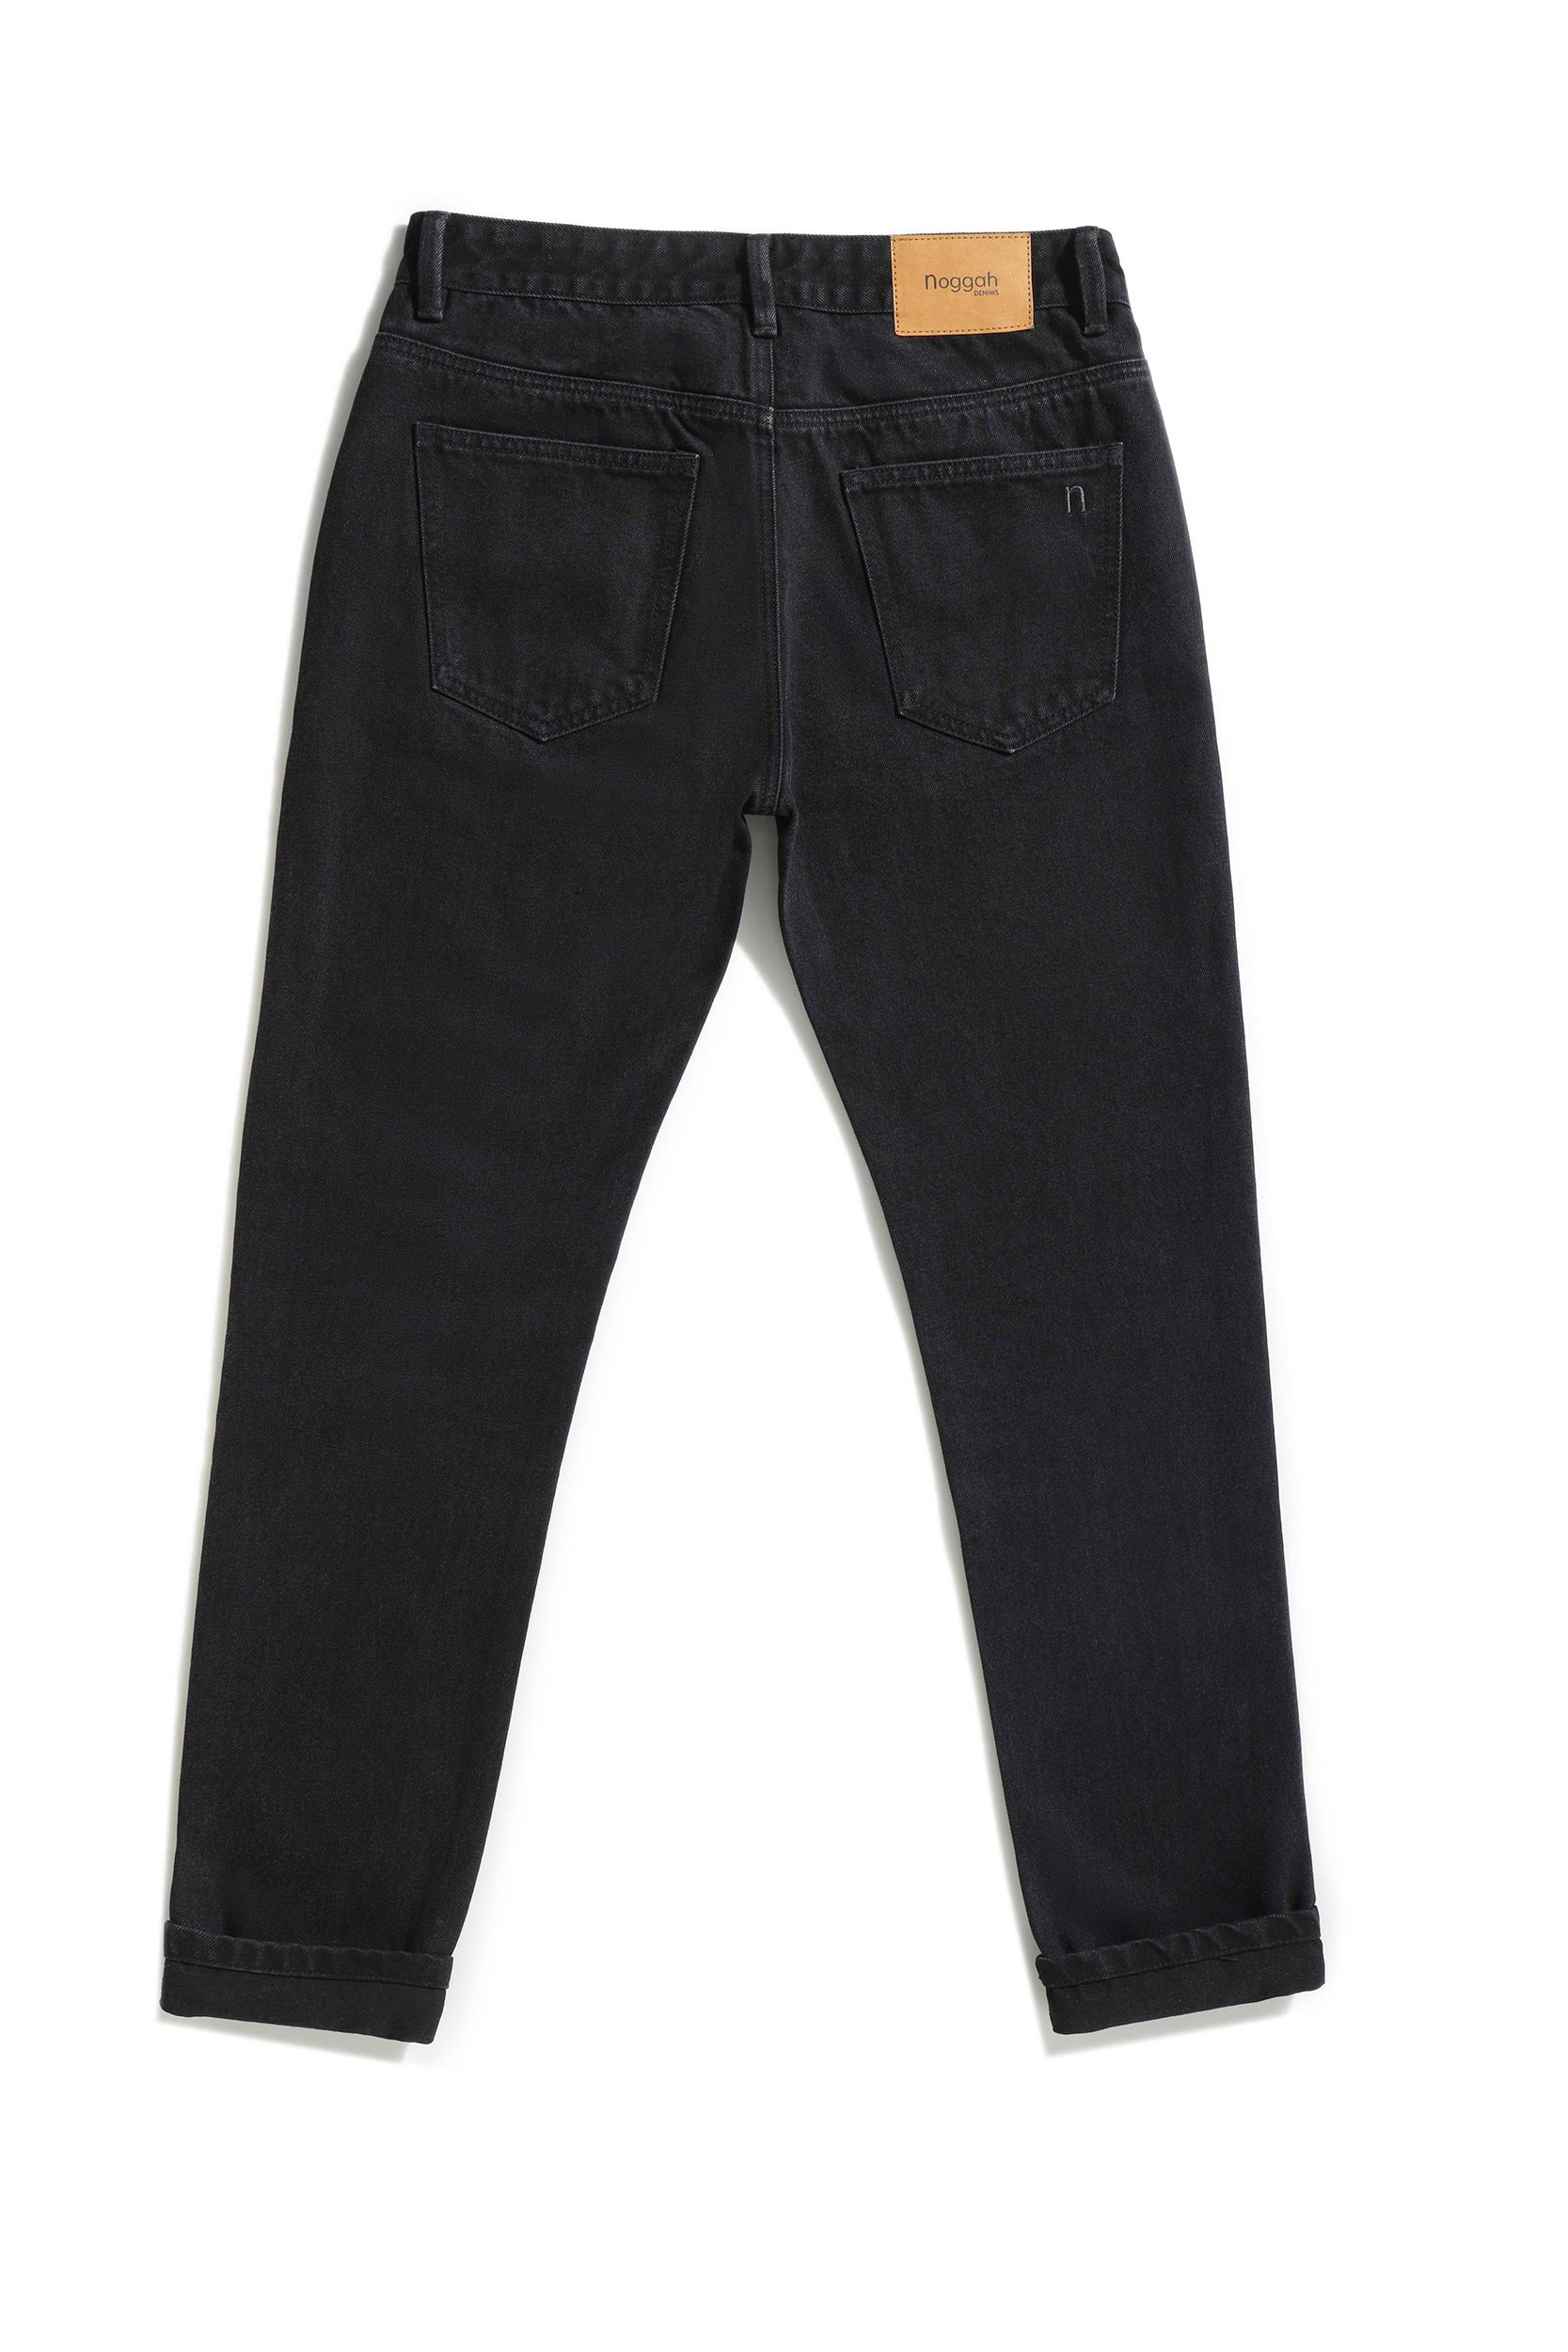 High Street Retro Black Stacked Jeans Mens With Heavy Industry Hole, Frayed  Destruction, Waxed Finish, Straight Ripped Pencil Pants, Oversized Denim  Trousers 230827 From Cong02, $27.97 | DHgate.Com